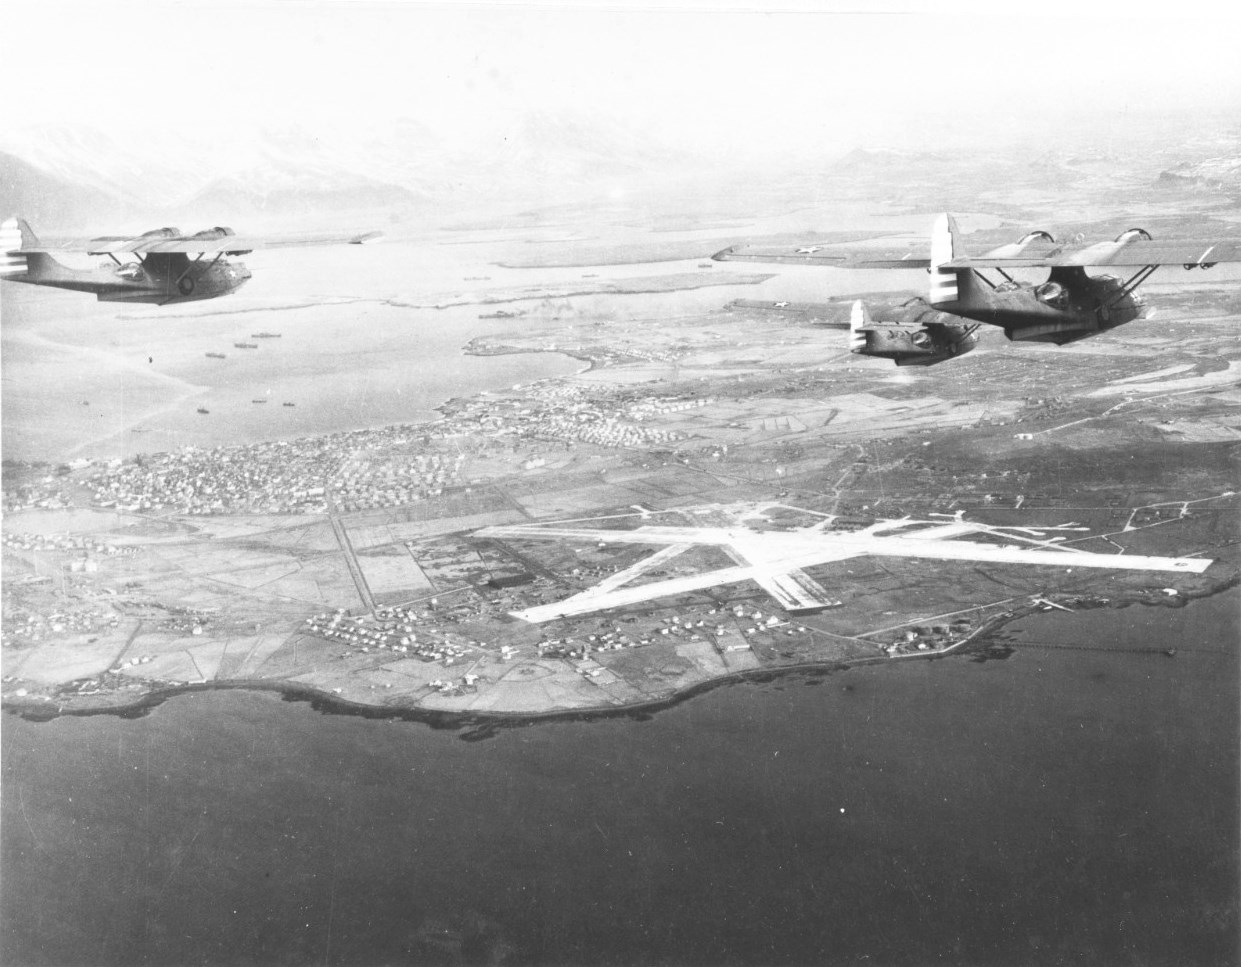 Three PBY-5A Catalinas of Patrol Squadron VP-73 approaching Reykjavík, Iceland, 23 Mar 1942. Note the red and white rudder stripes that were authorized for barely four months.